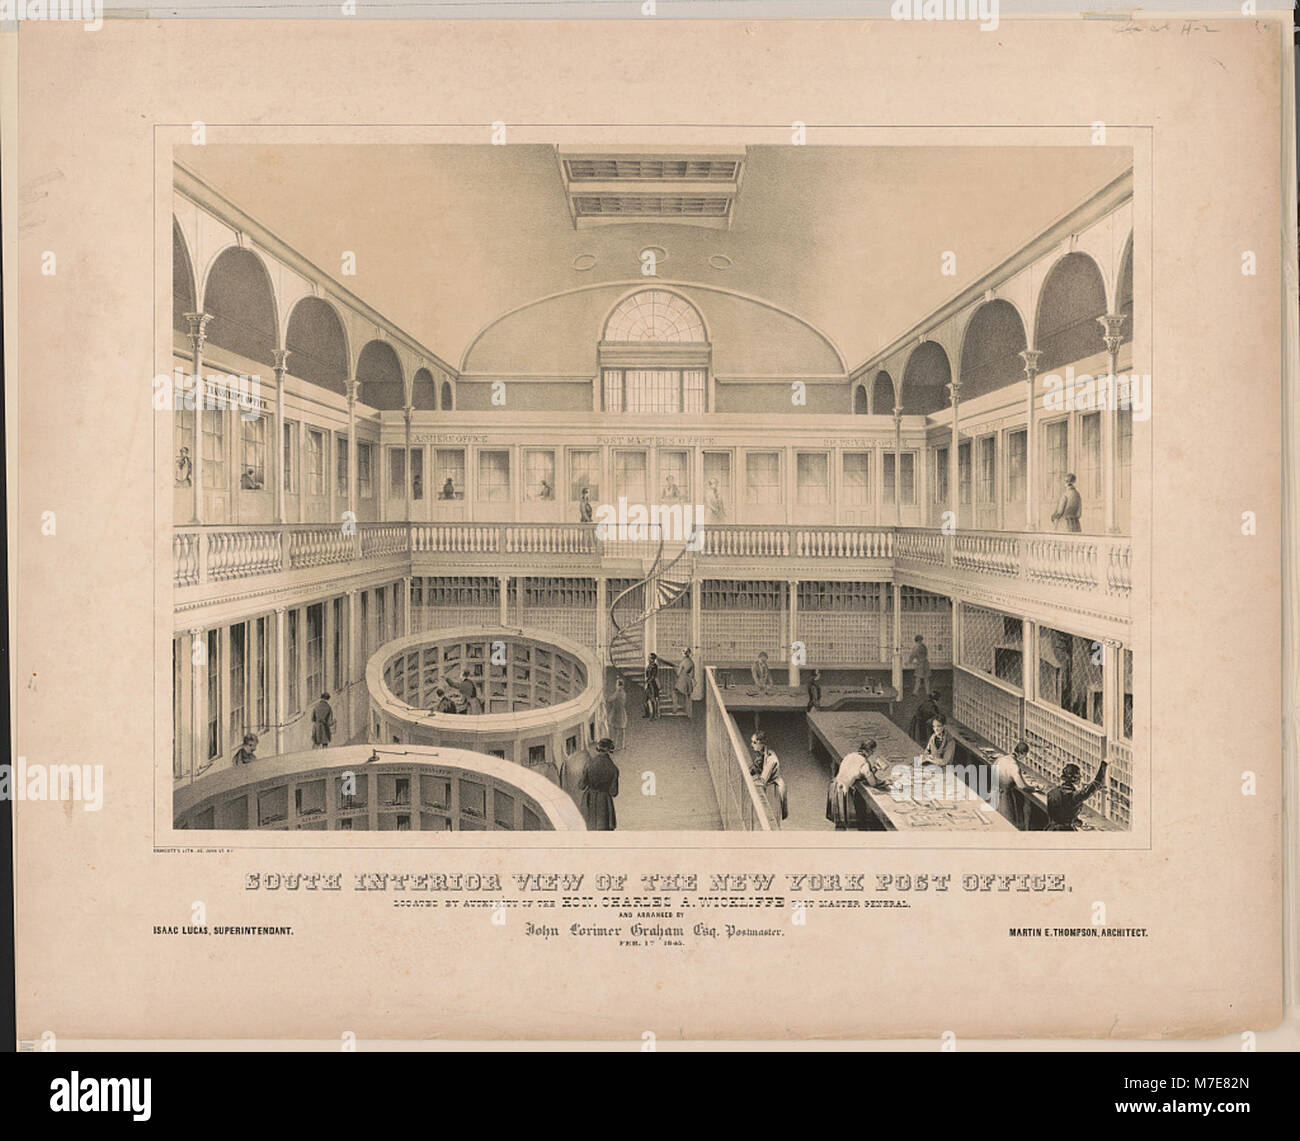 South interior view of the New York post office, located by authority of the Hon. Charles A. Wickliffe Post Master General, and arranged by John Lorimer Graham Esq. Postmaster. Fer. 1st 1845 LCCN2003664215 Stock Photo